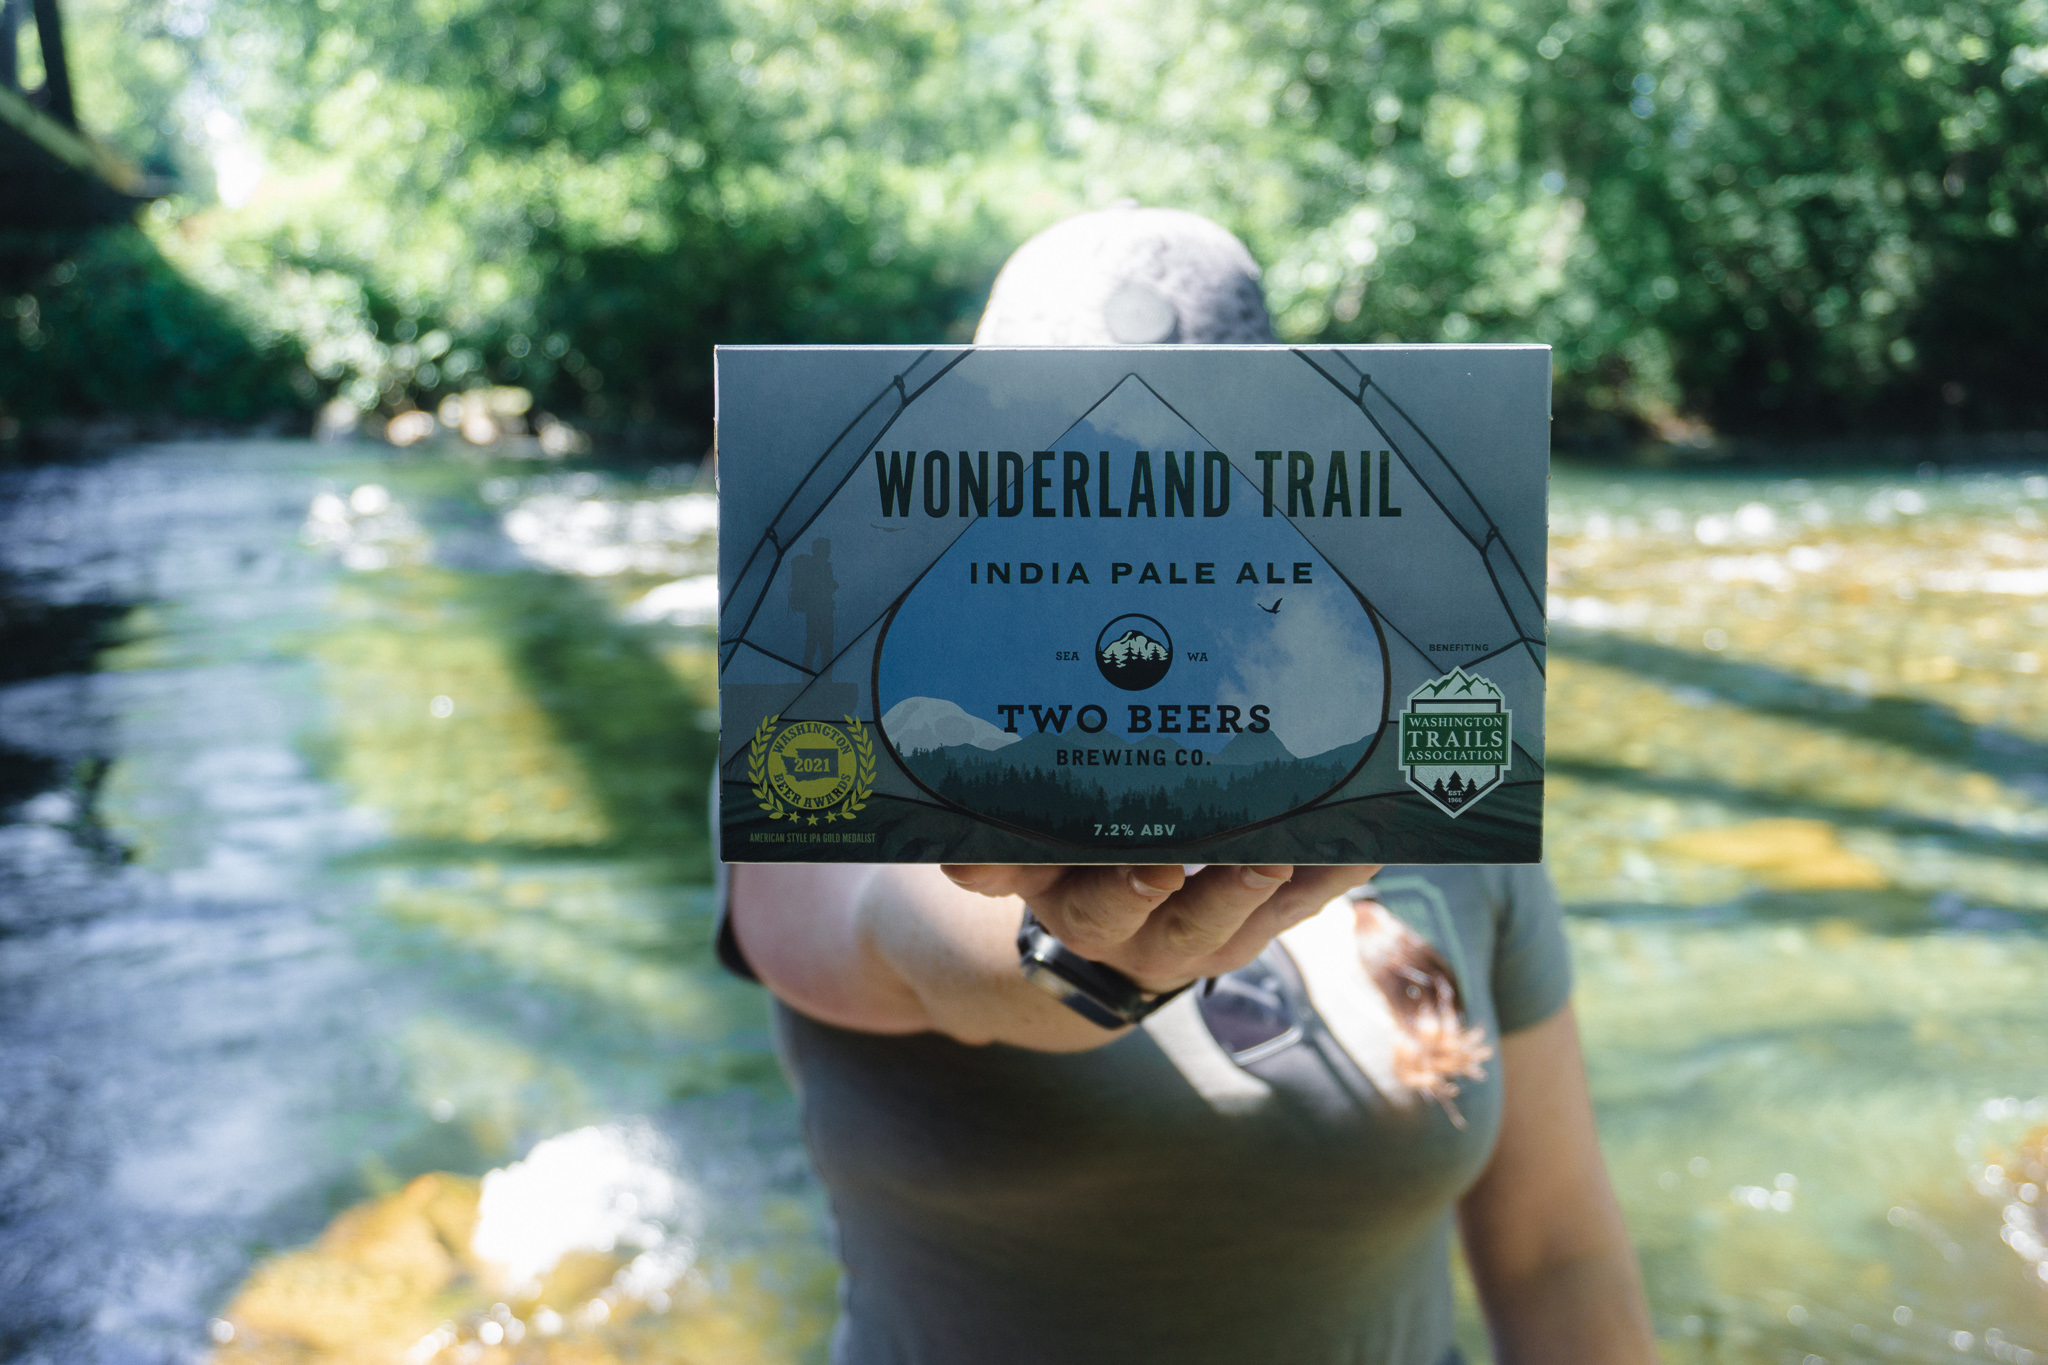 Two Beers Brewing partners with Washington Trails Association on Wonderland Trail IPA. (image courtesy of Two Beers Brewing)